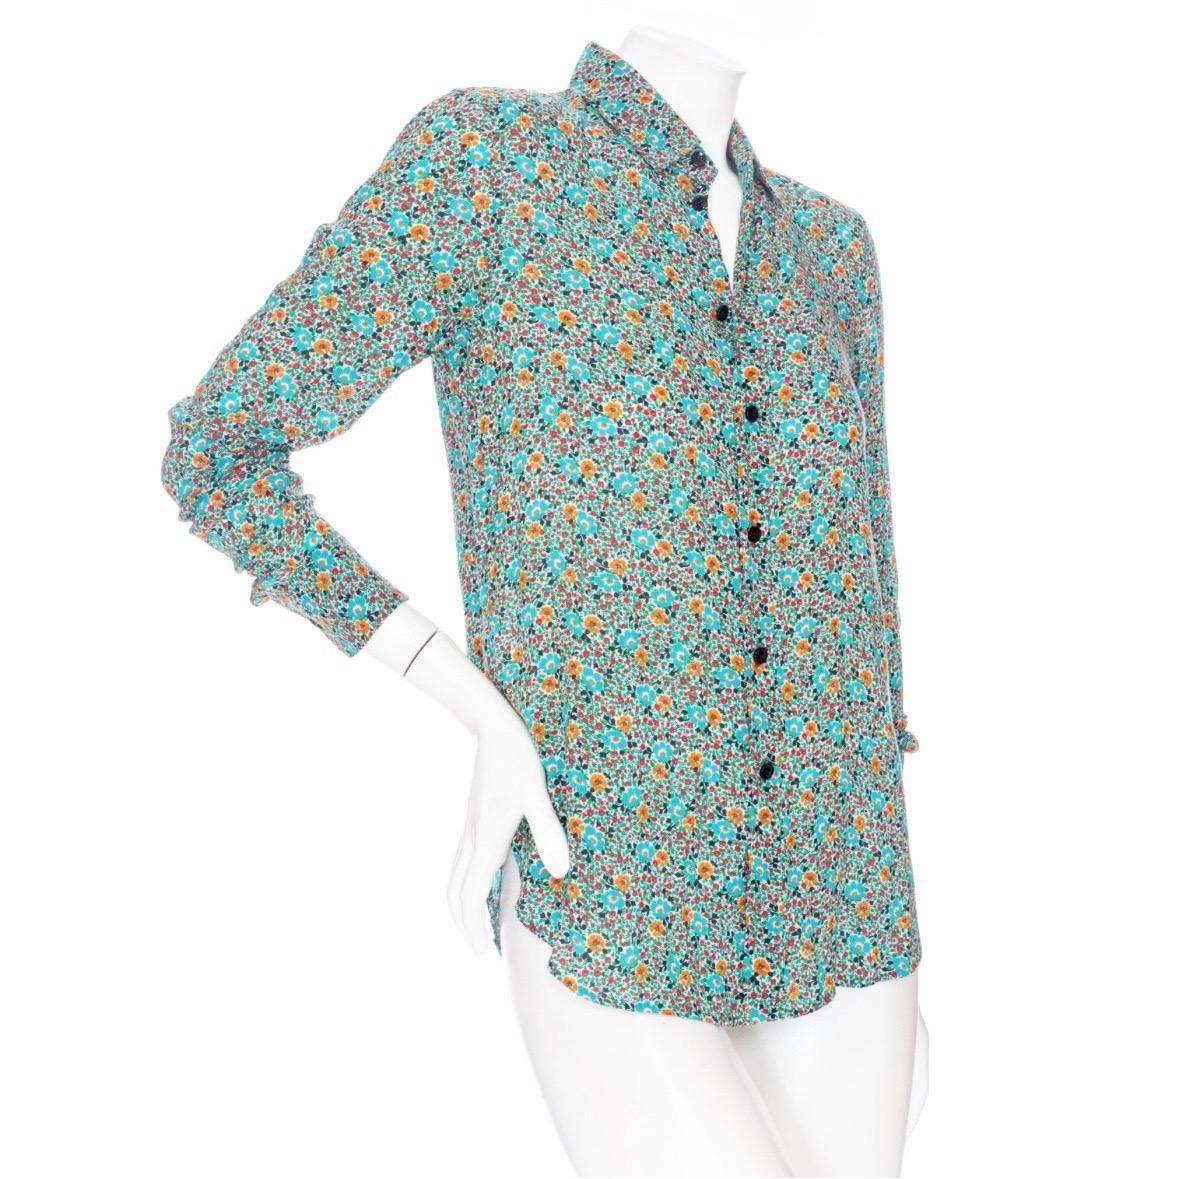 Saint Laurent Multicolored Viscose Floral-Print Long Sleeve Button Down Shirt 

Teal Blue
Multicolored florals in red, orange, green, blue and black
Long shirt sleeves with button fastening at cuffs
Shirt collar
Button down front